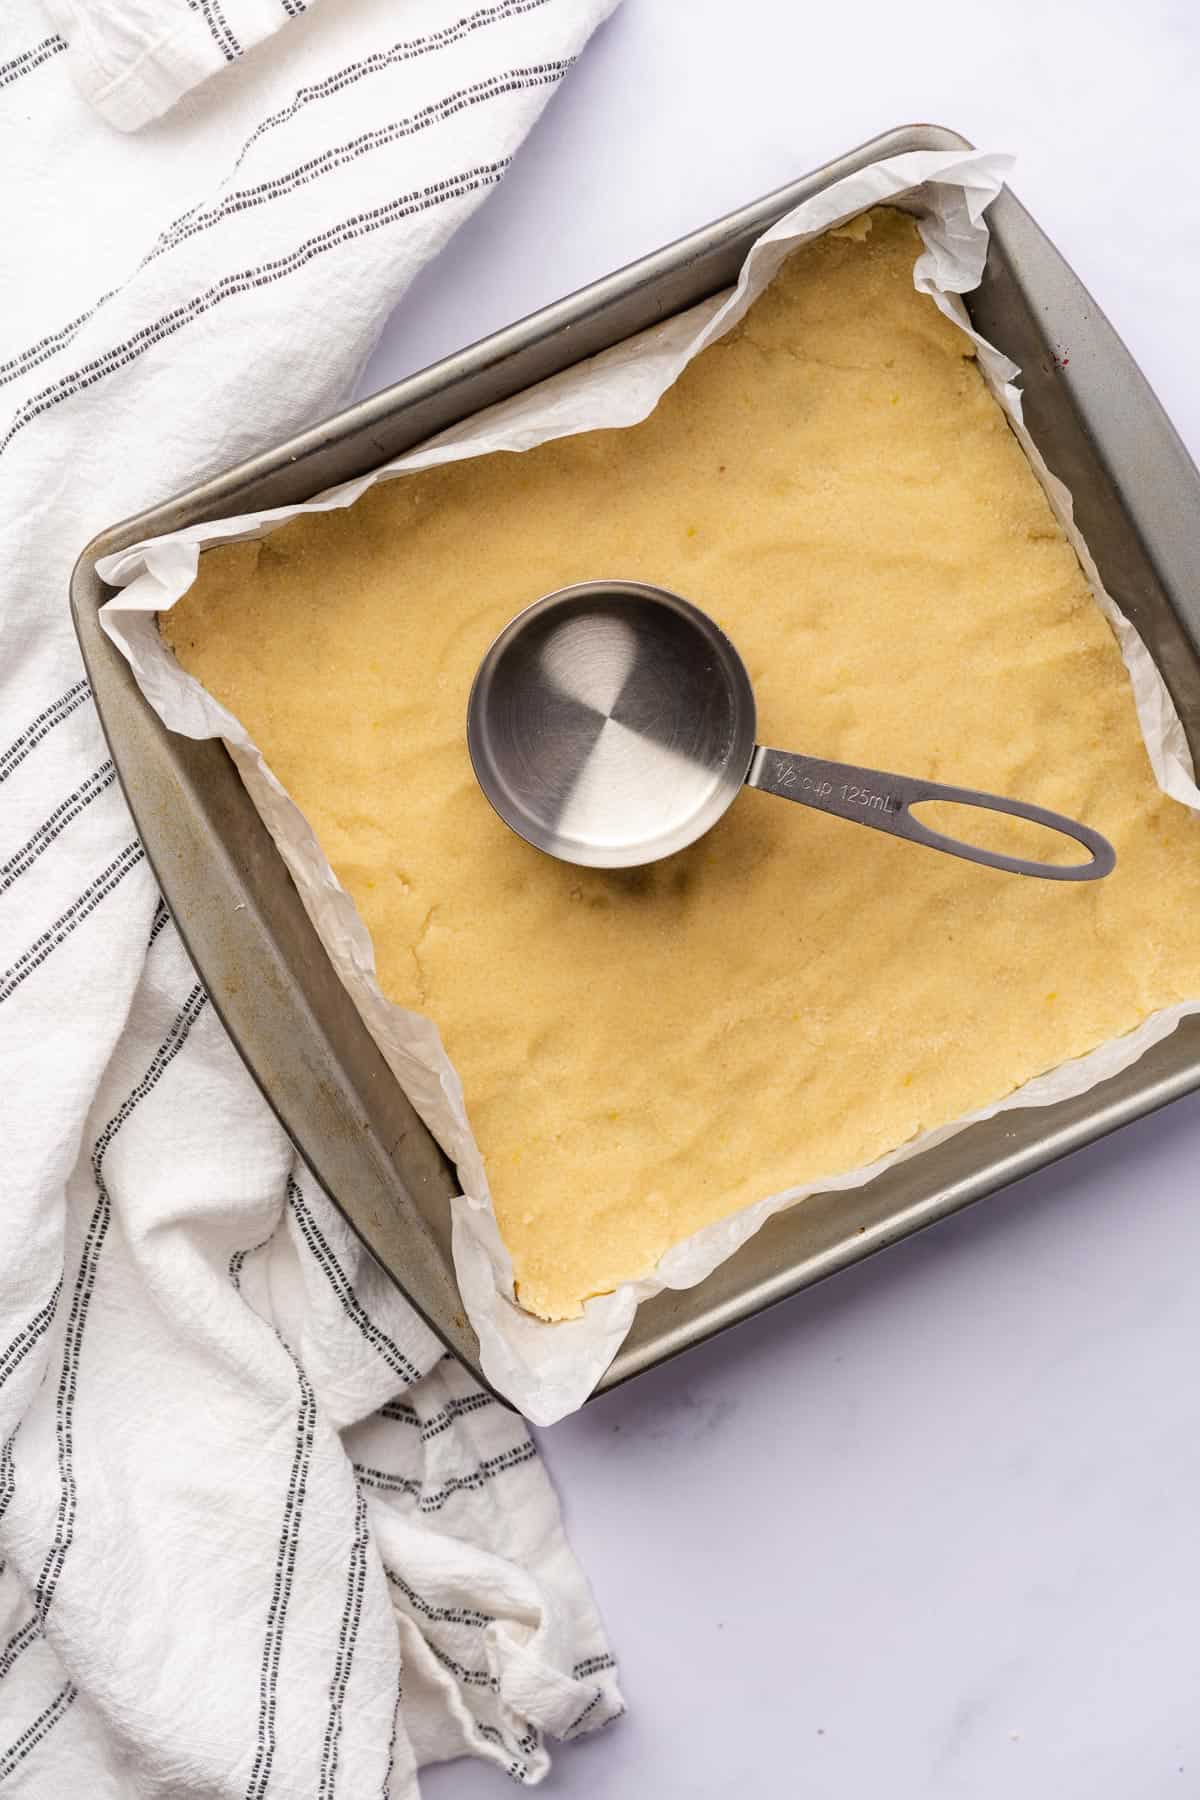 raw shortbread crust made from almond flour being pressed into a 9x9 inch pan with white parchment paper and a measuring cup flattening the dough